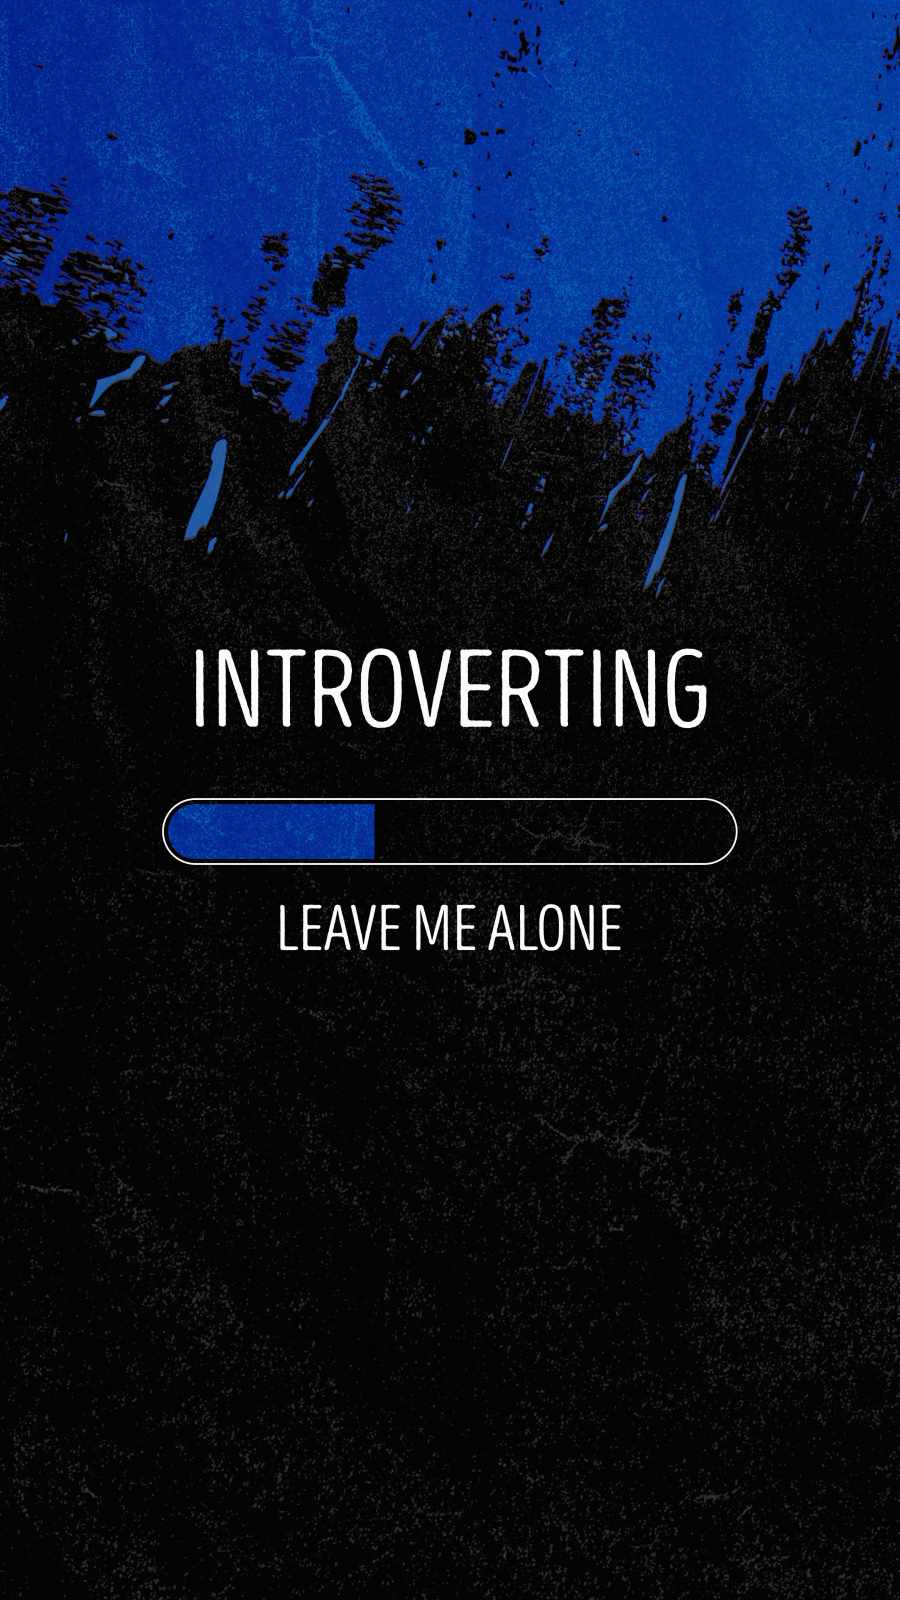 Leave Me Alone iPhone Wallpaper